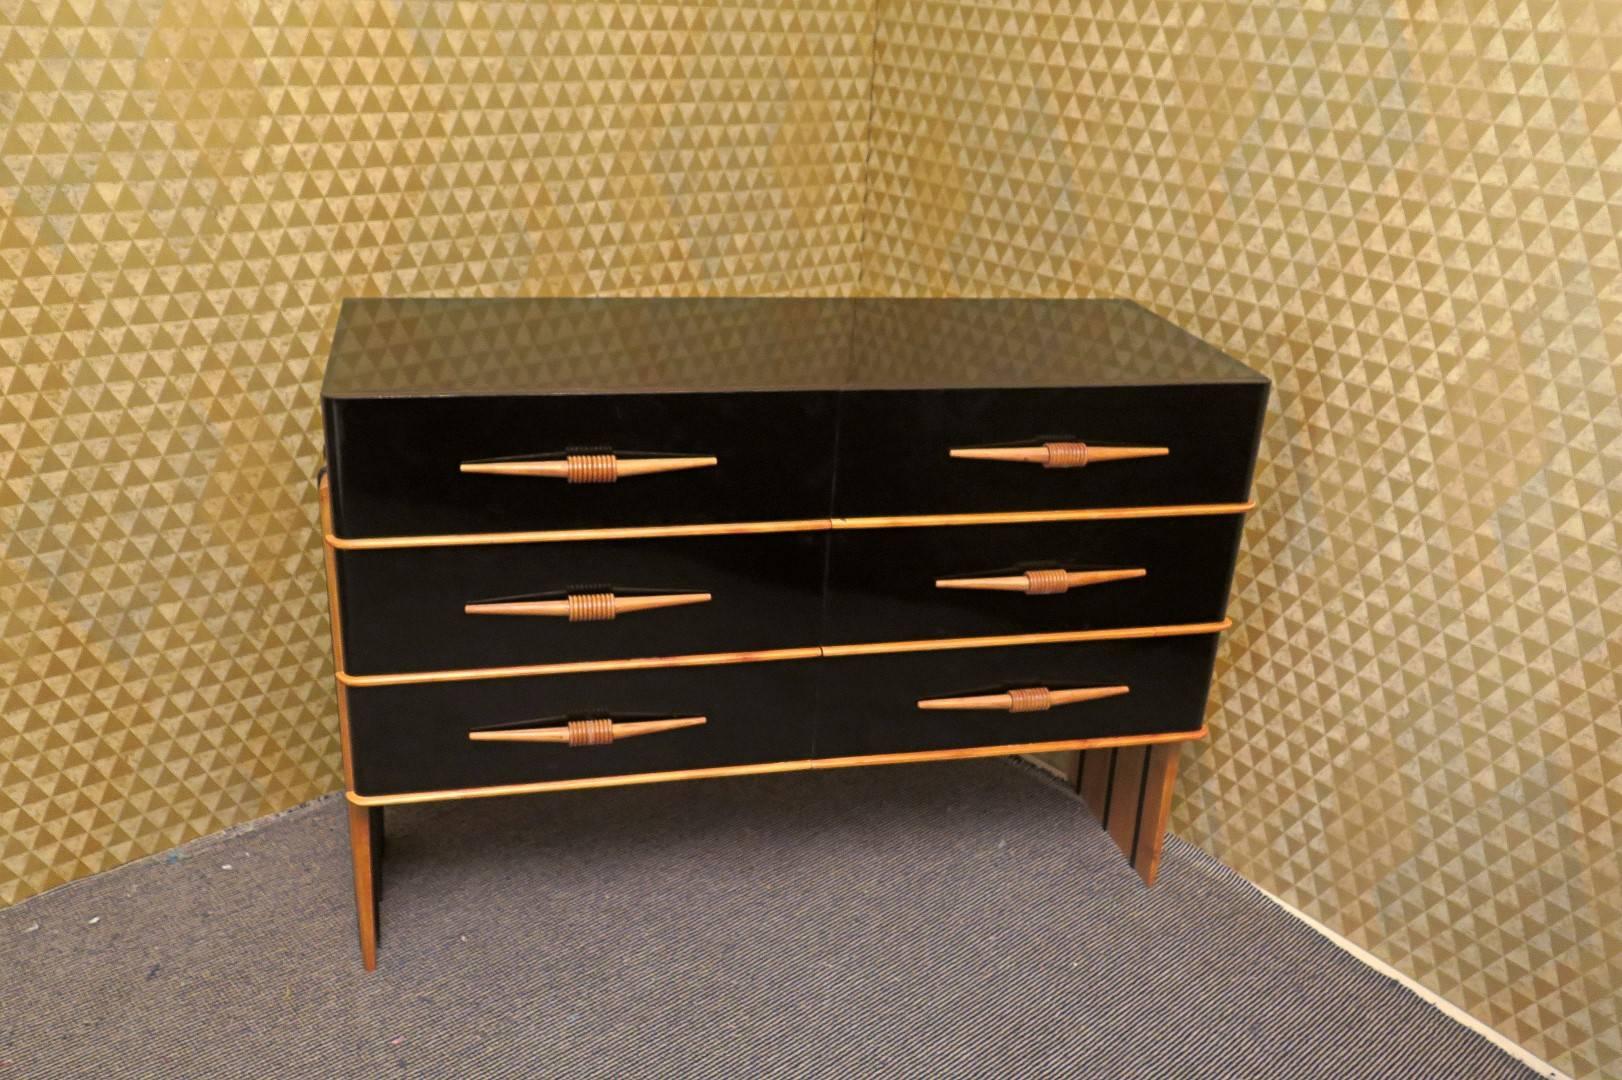 Very particular dresser Art Deco, lacquered all black and details in maple. Six drawers and six beautiful handles. Very beautiful part side.